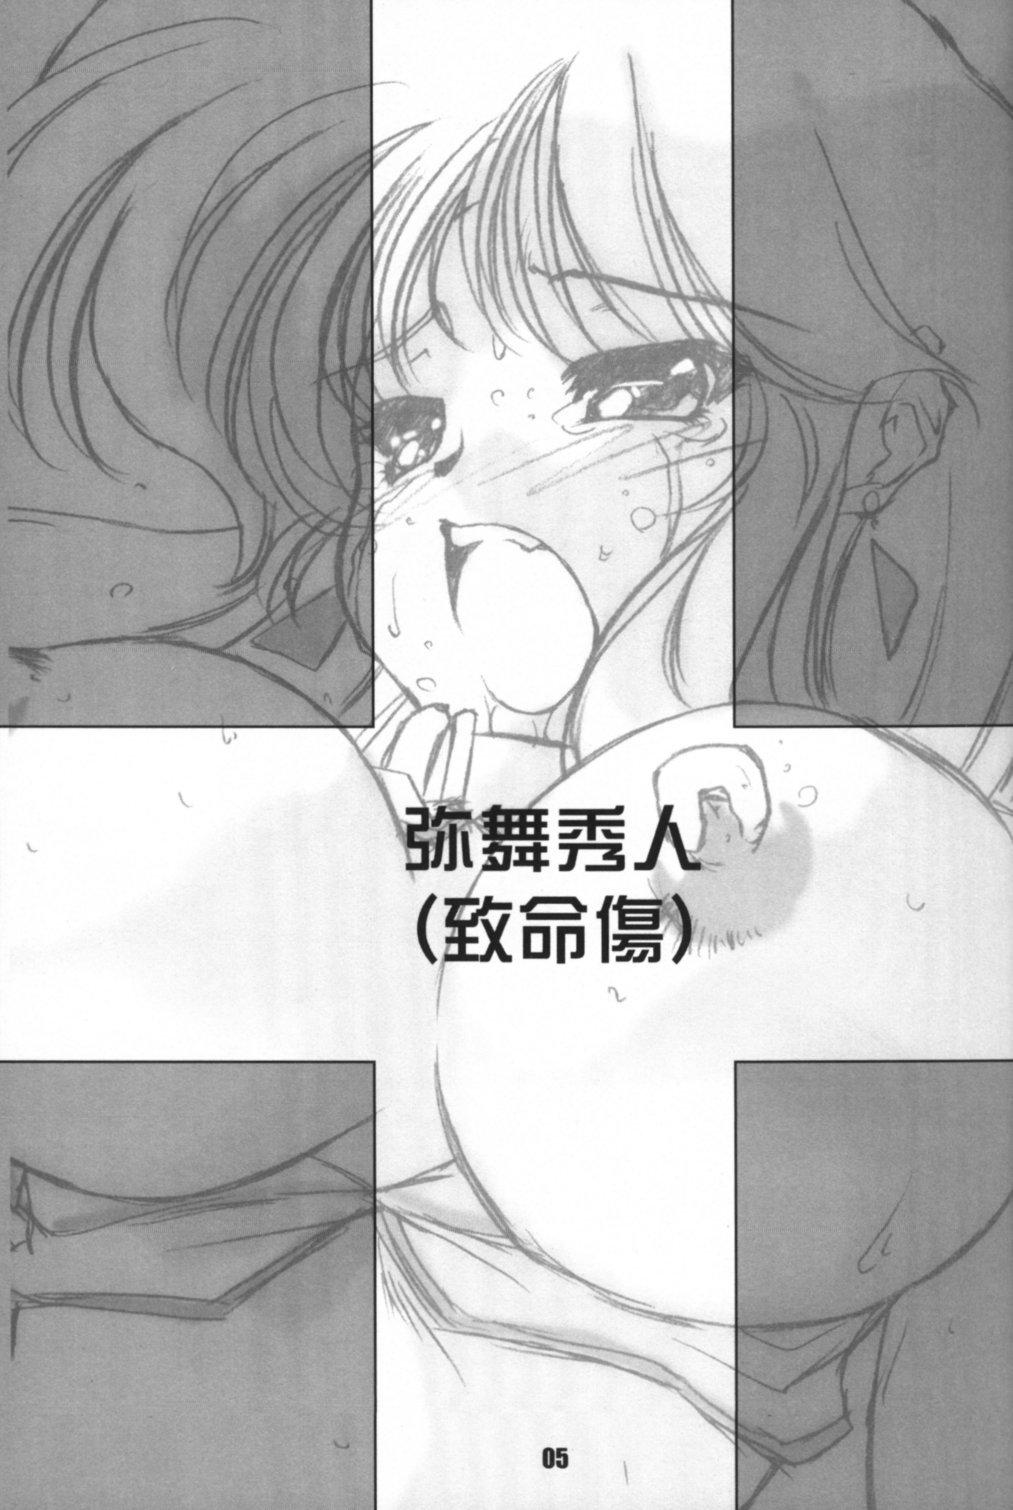 Lady WORKS Vol.54 Une fleur fascinante. Revision. - Dirty pair Story - Page 5